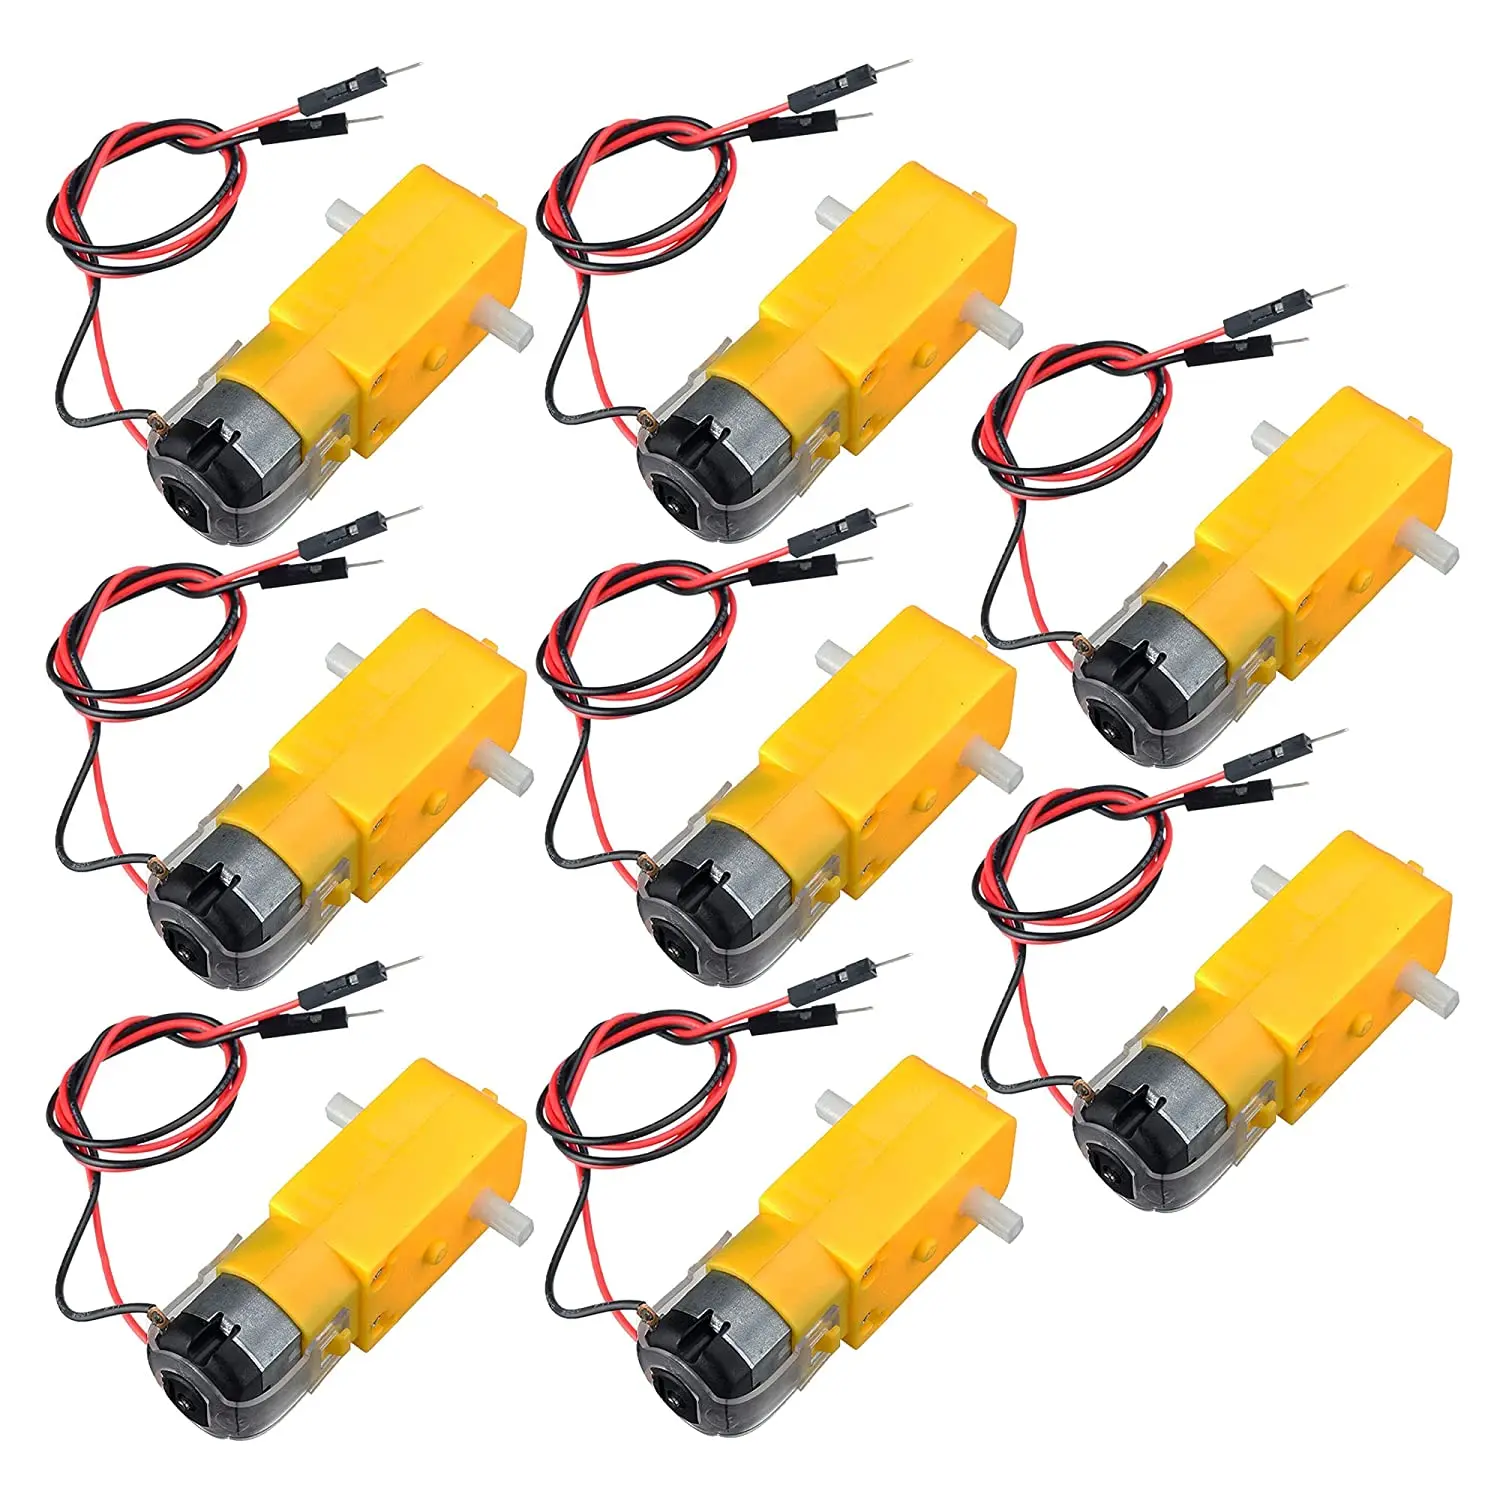 MKYCAI 8pcs TT Motor DC Electric Motor 3V-6V Dual Shaft Geared Motor Magnetic Gearbox Engine Motor Compatible with Ar-duino Smart Car Robot 